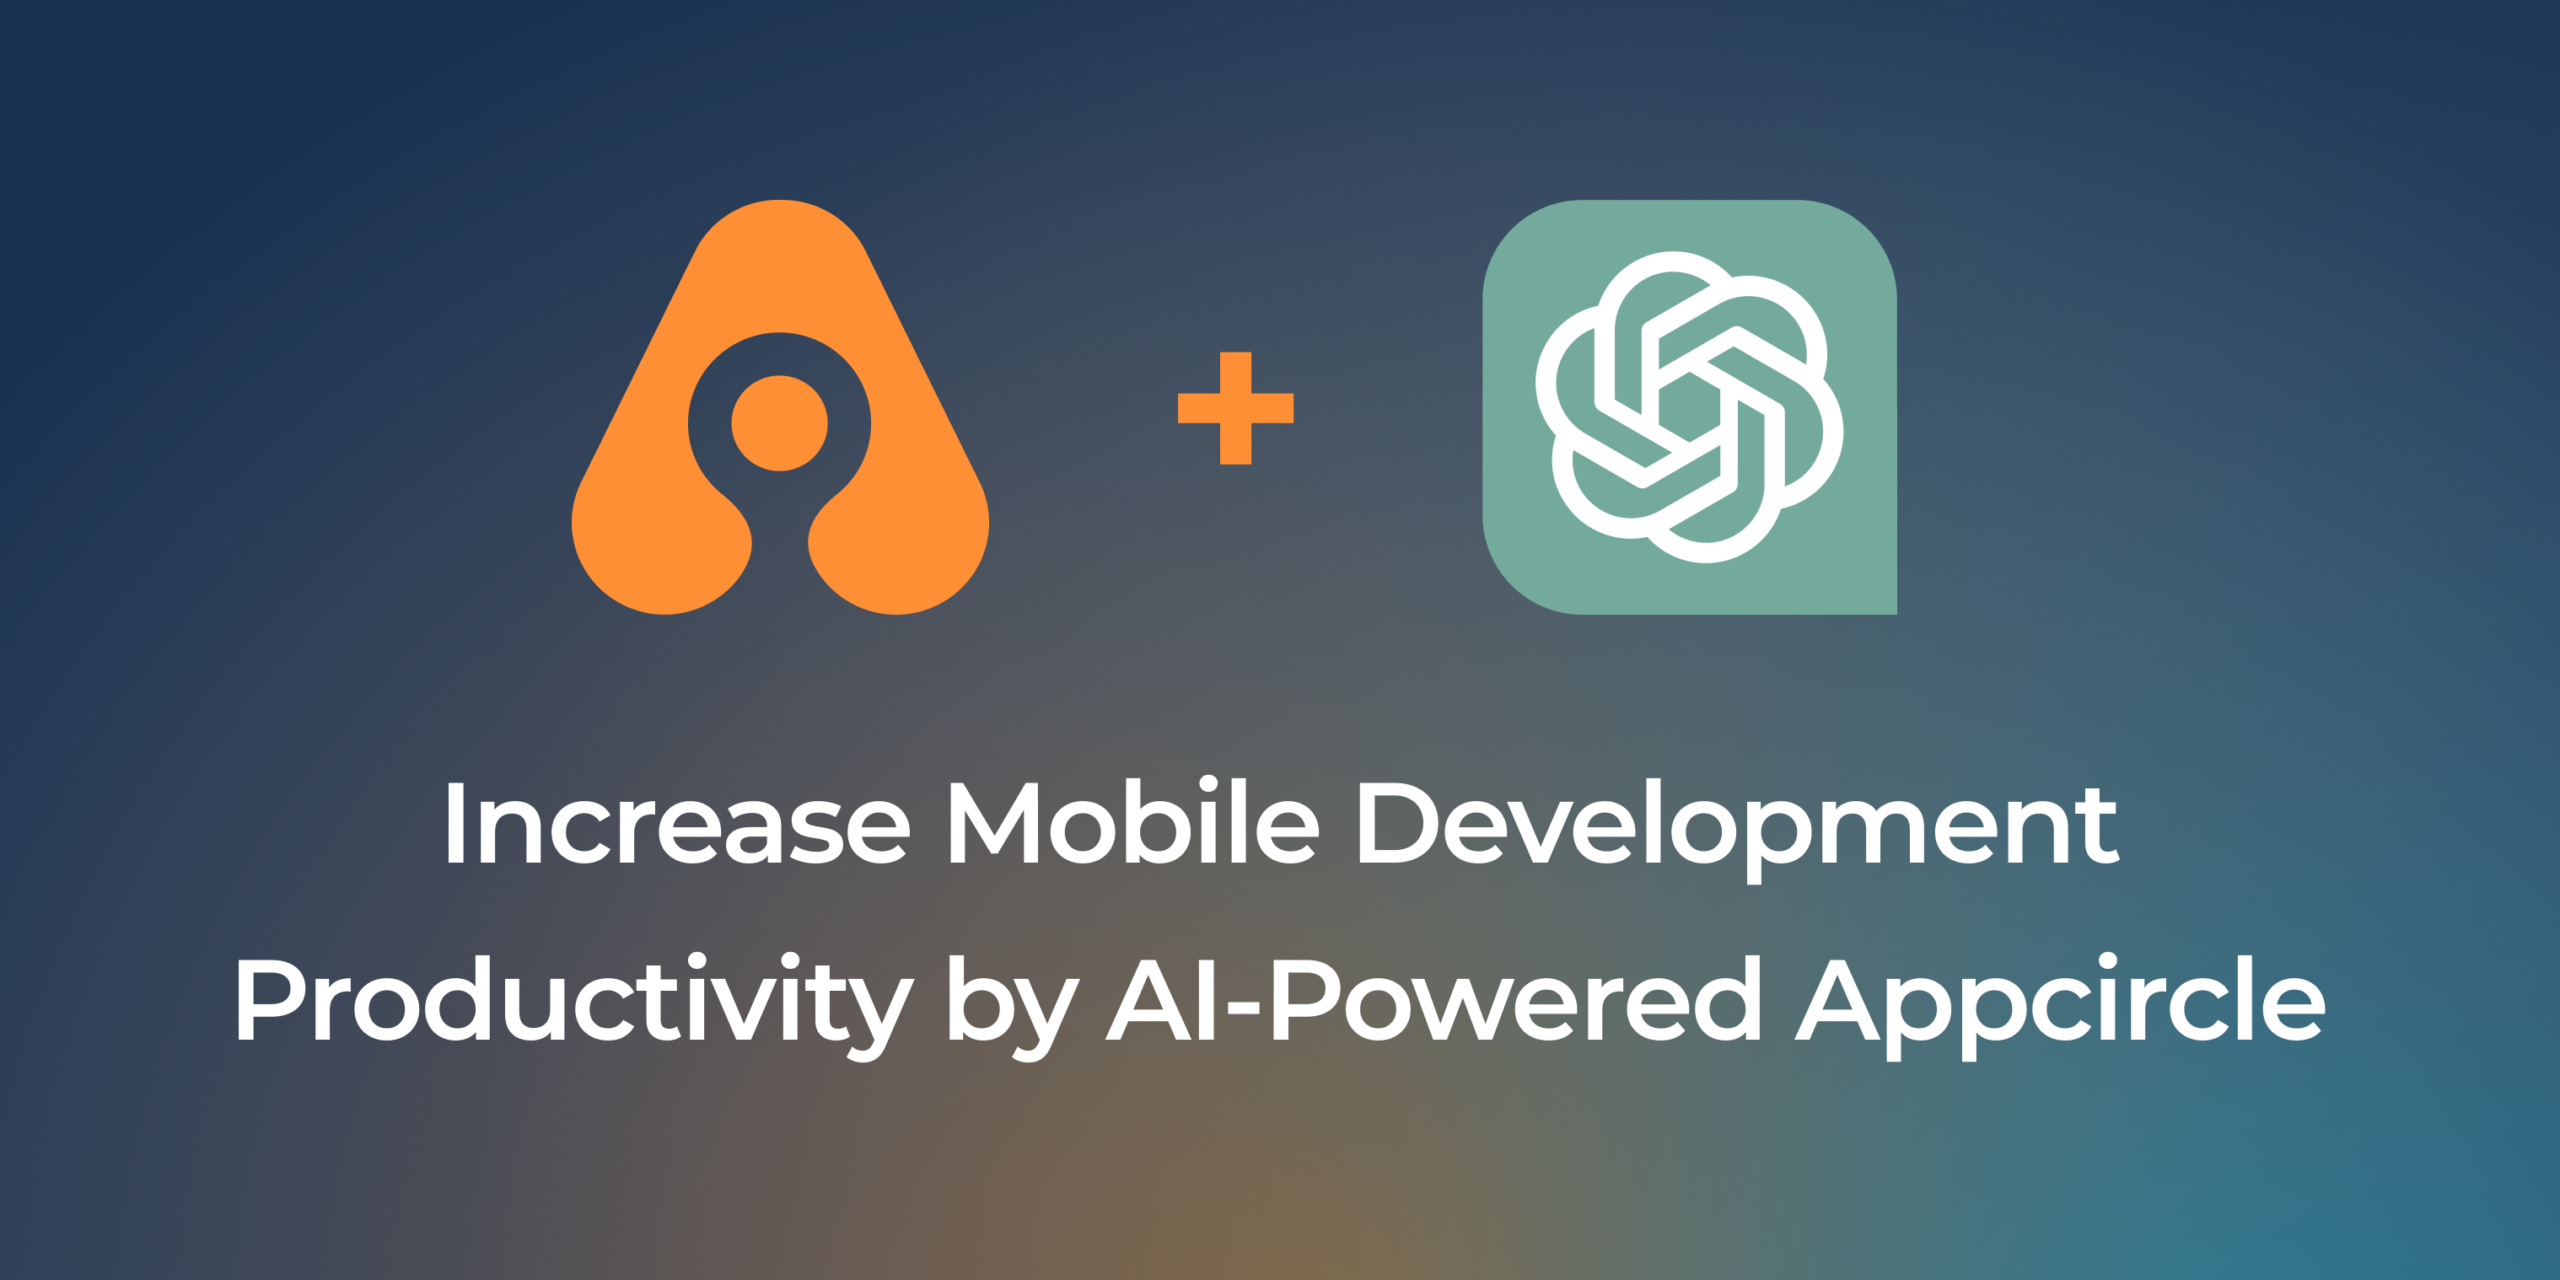 Increase Mobile Development Productivity by AI-Powered Appcircle